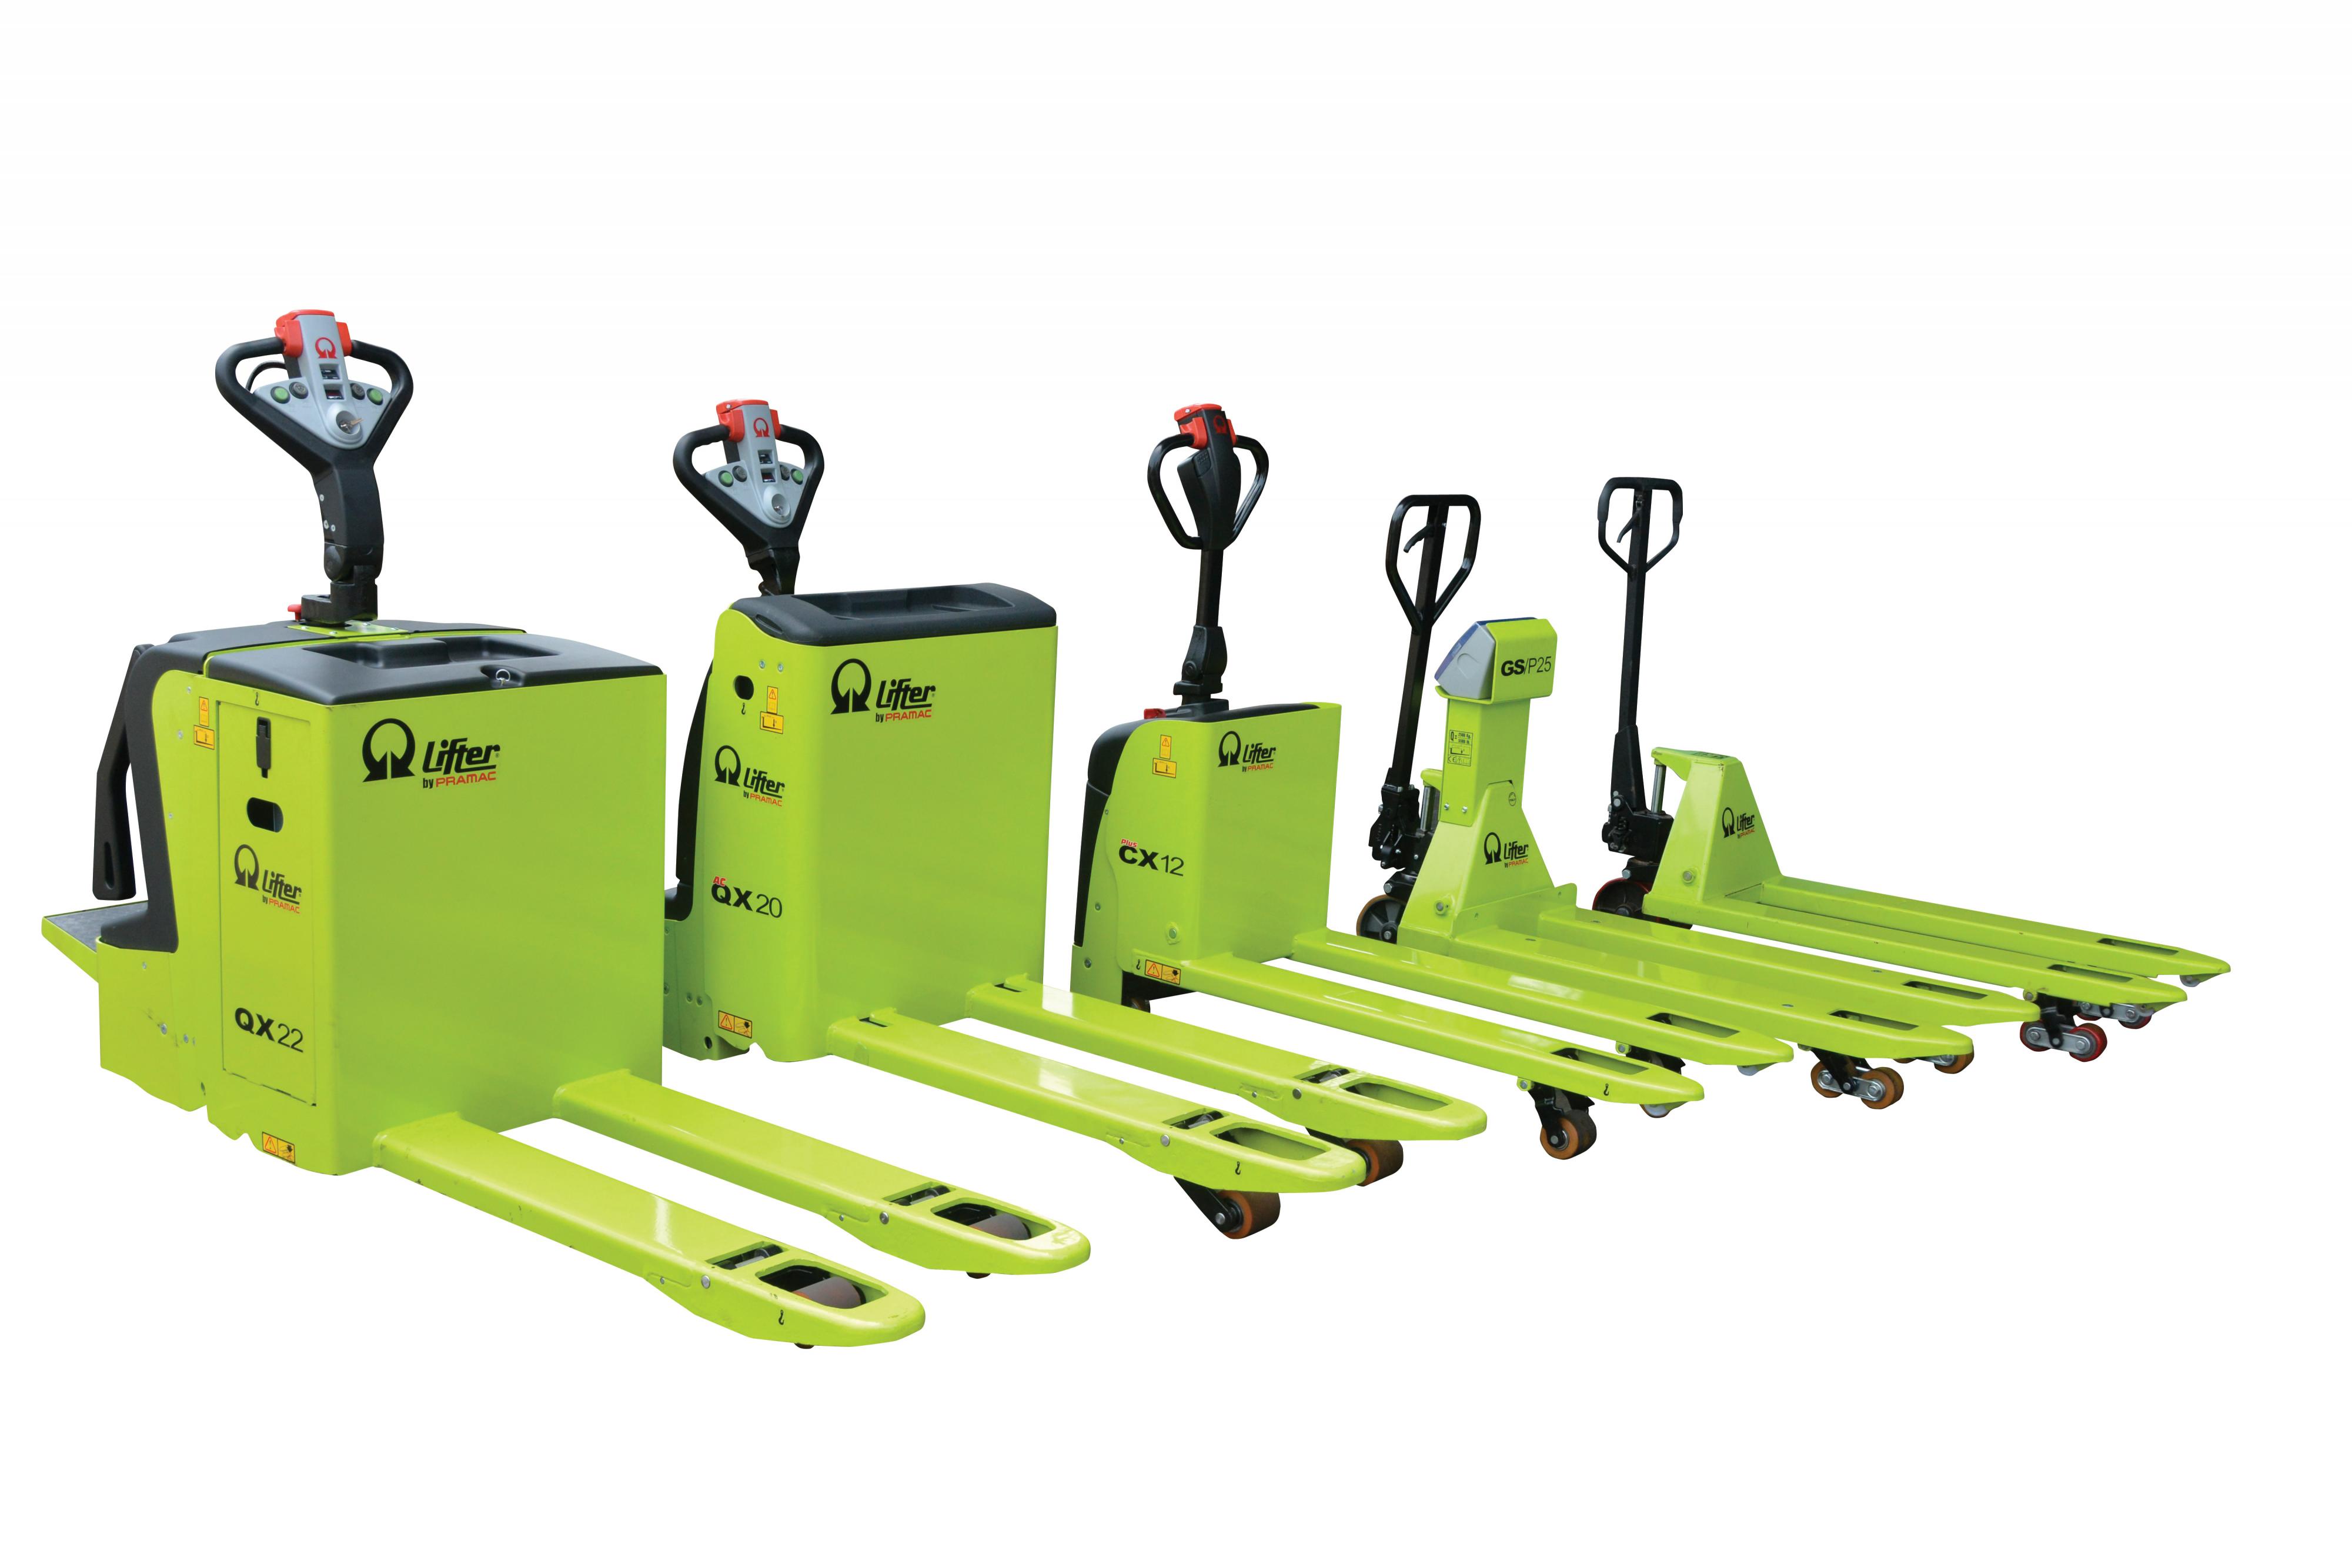 E-TECH Forklift Engineering Company has joined us as Pallet Truck distributor